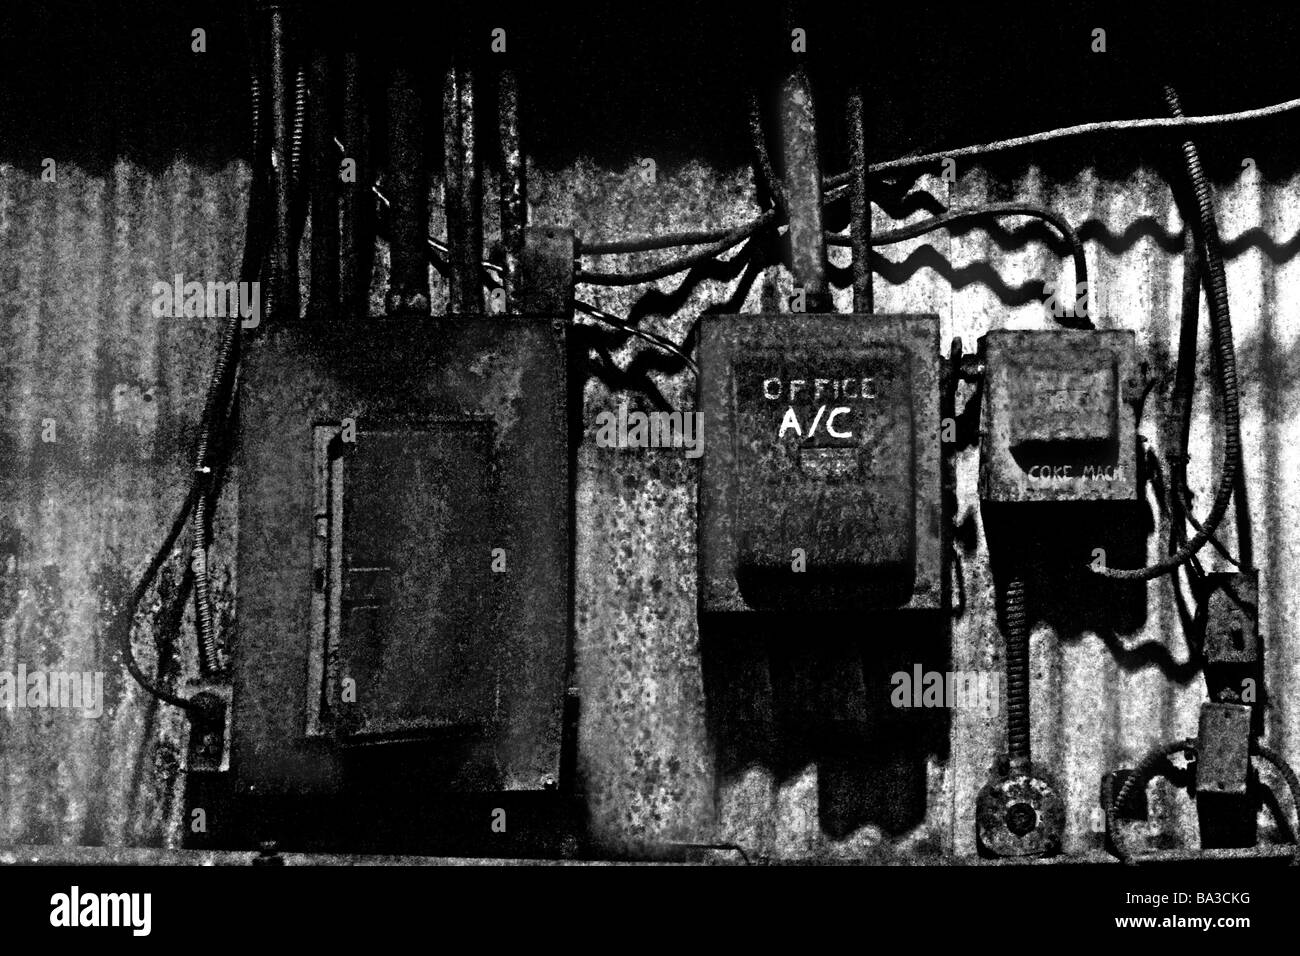 Black and white image of out dated electrical breakers and boxes on a corrugated metal wall. Stock Photo